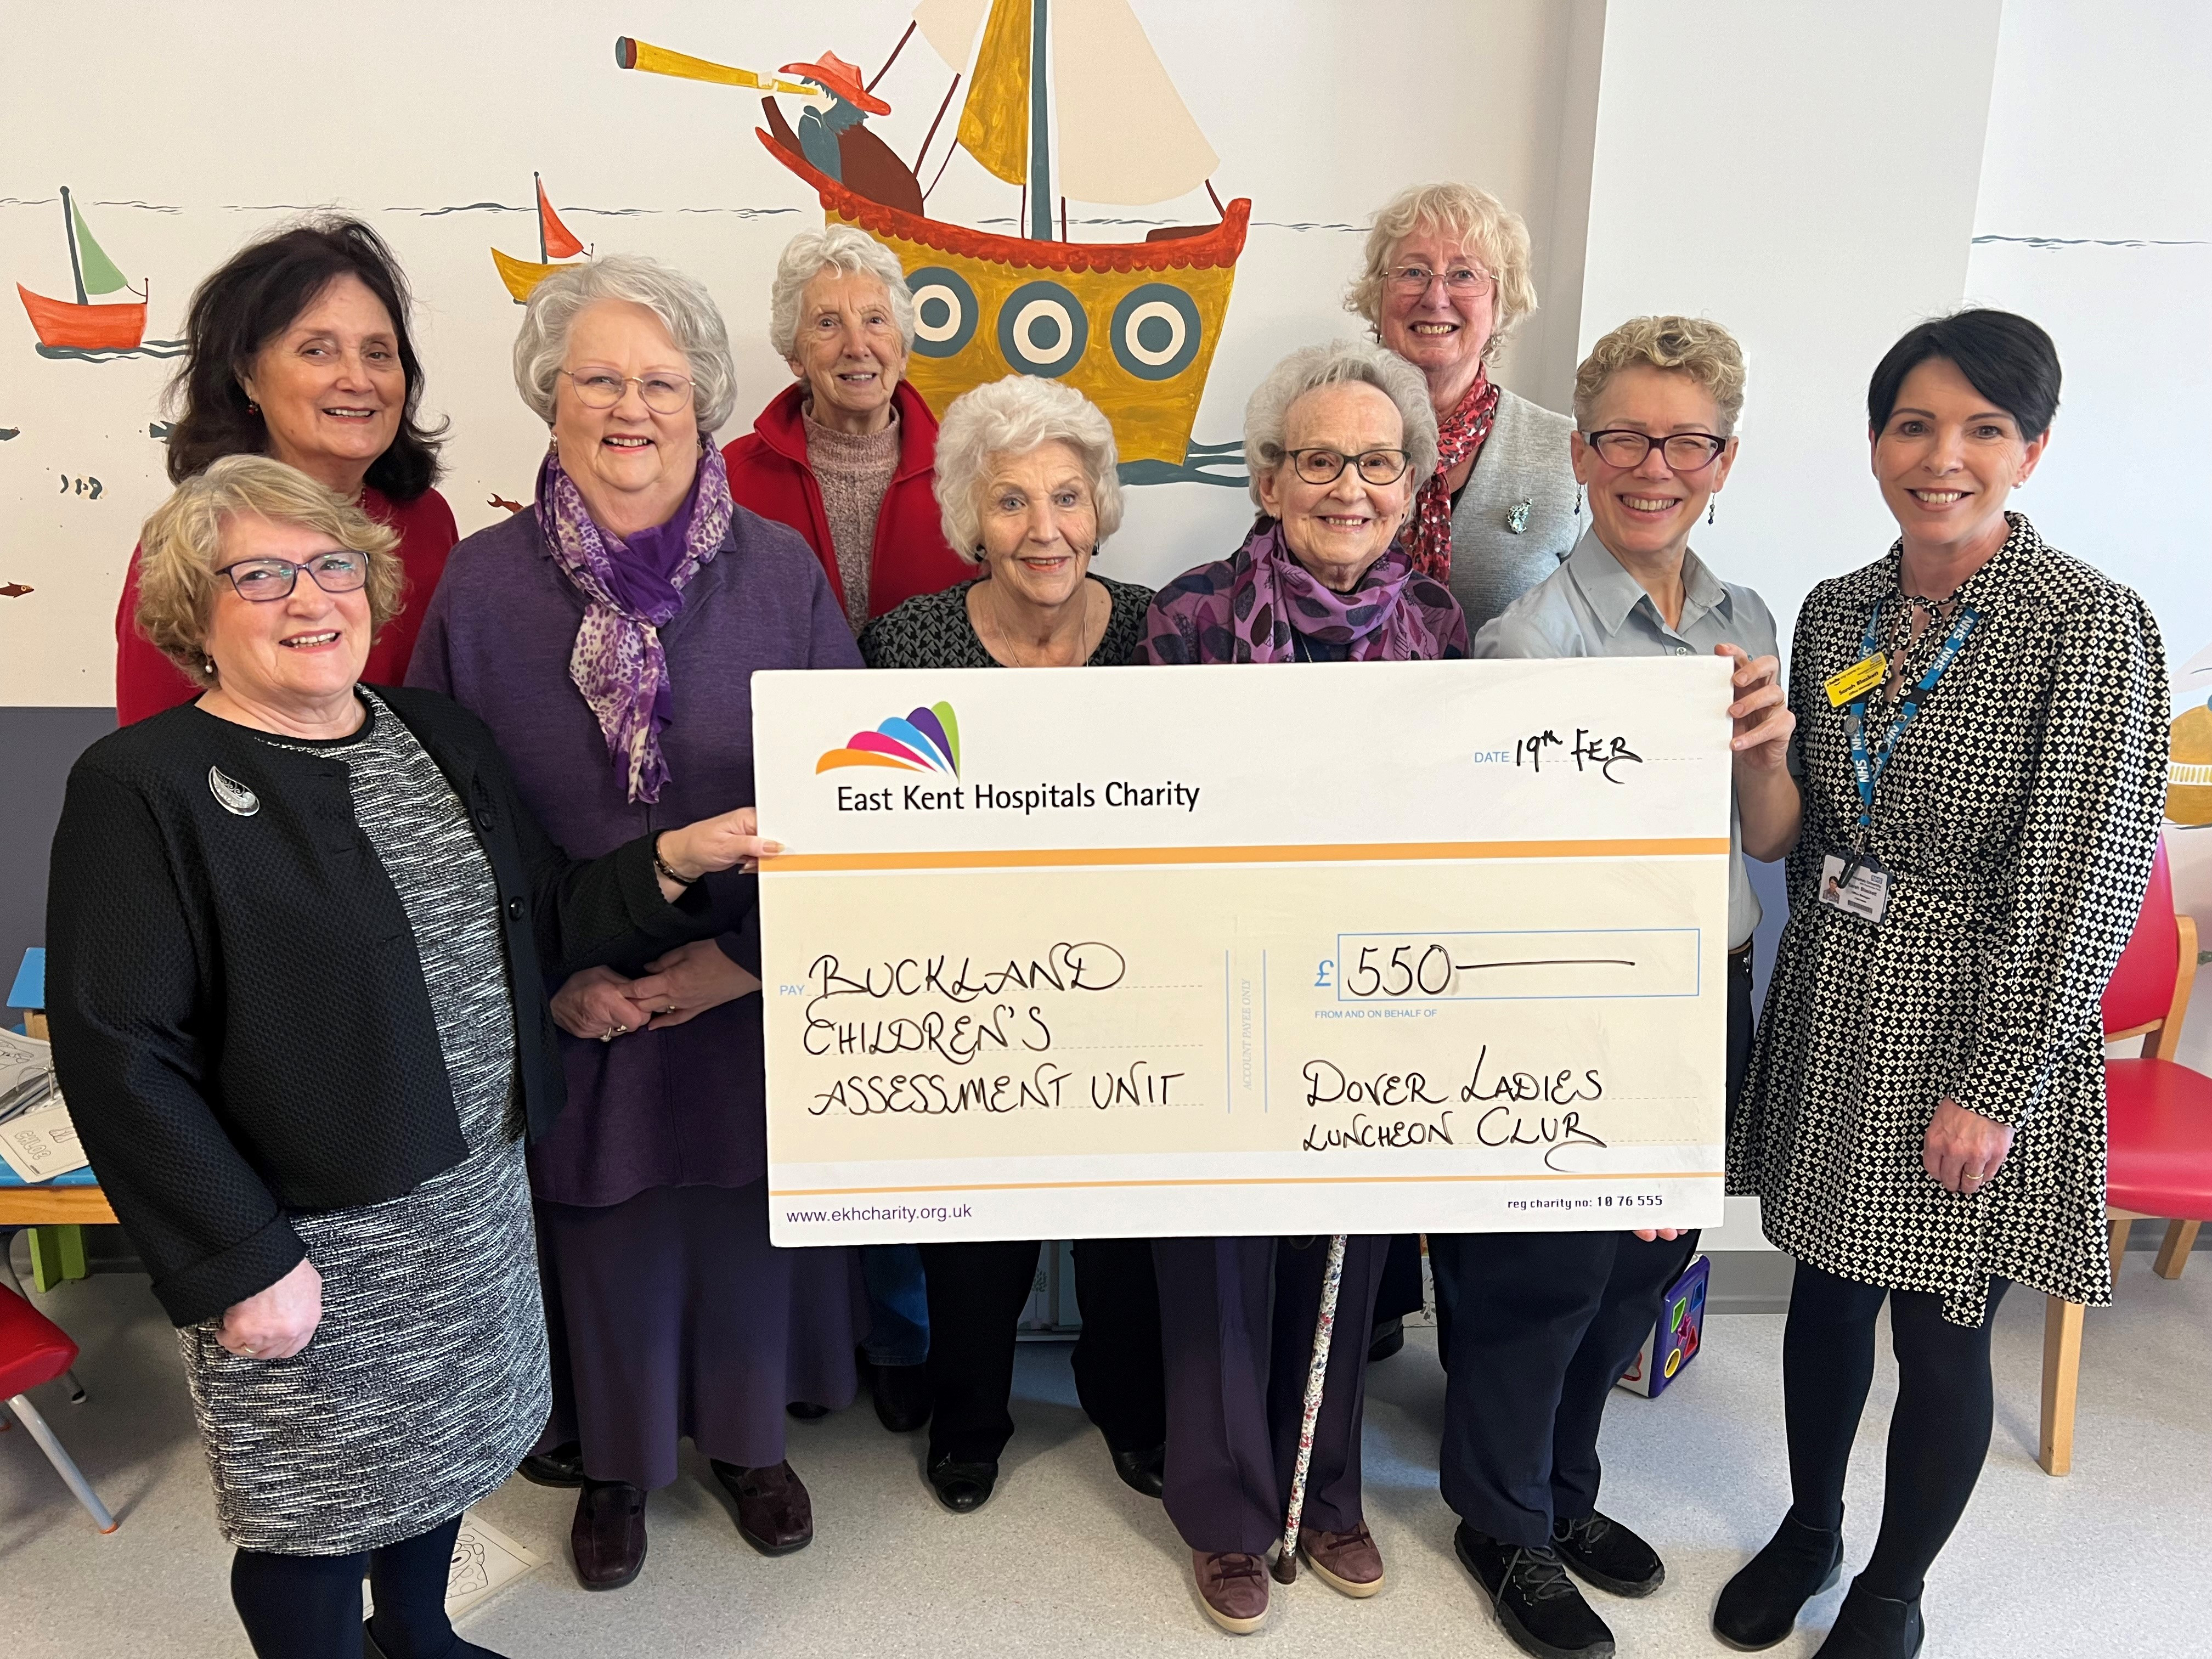 Committee members from Dover Ladies Luncheon Club hand over the cheque to staff at Buckland Hospital